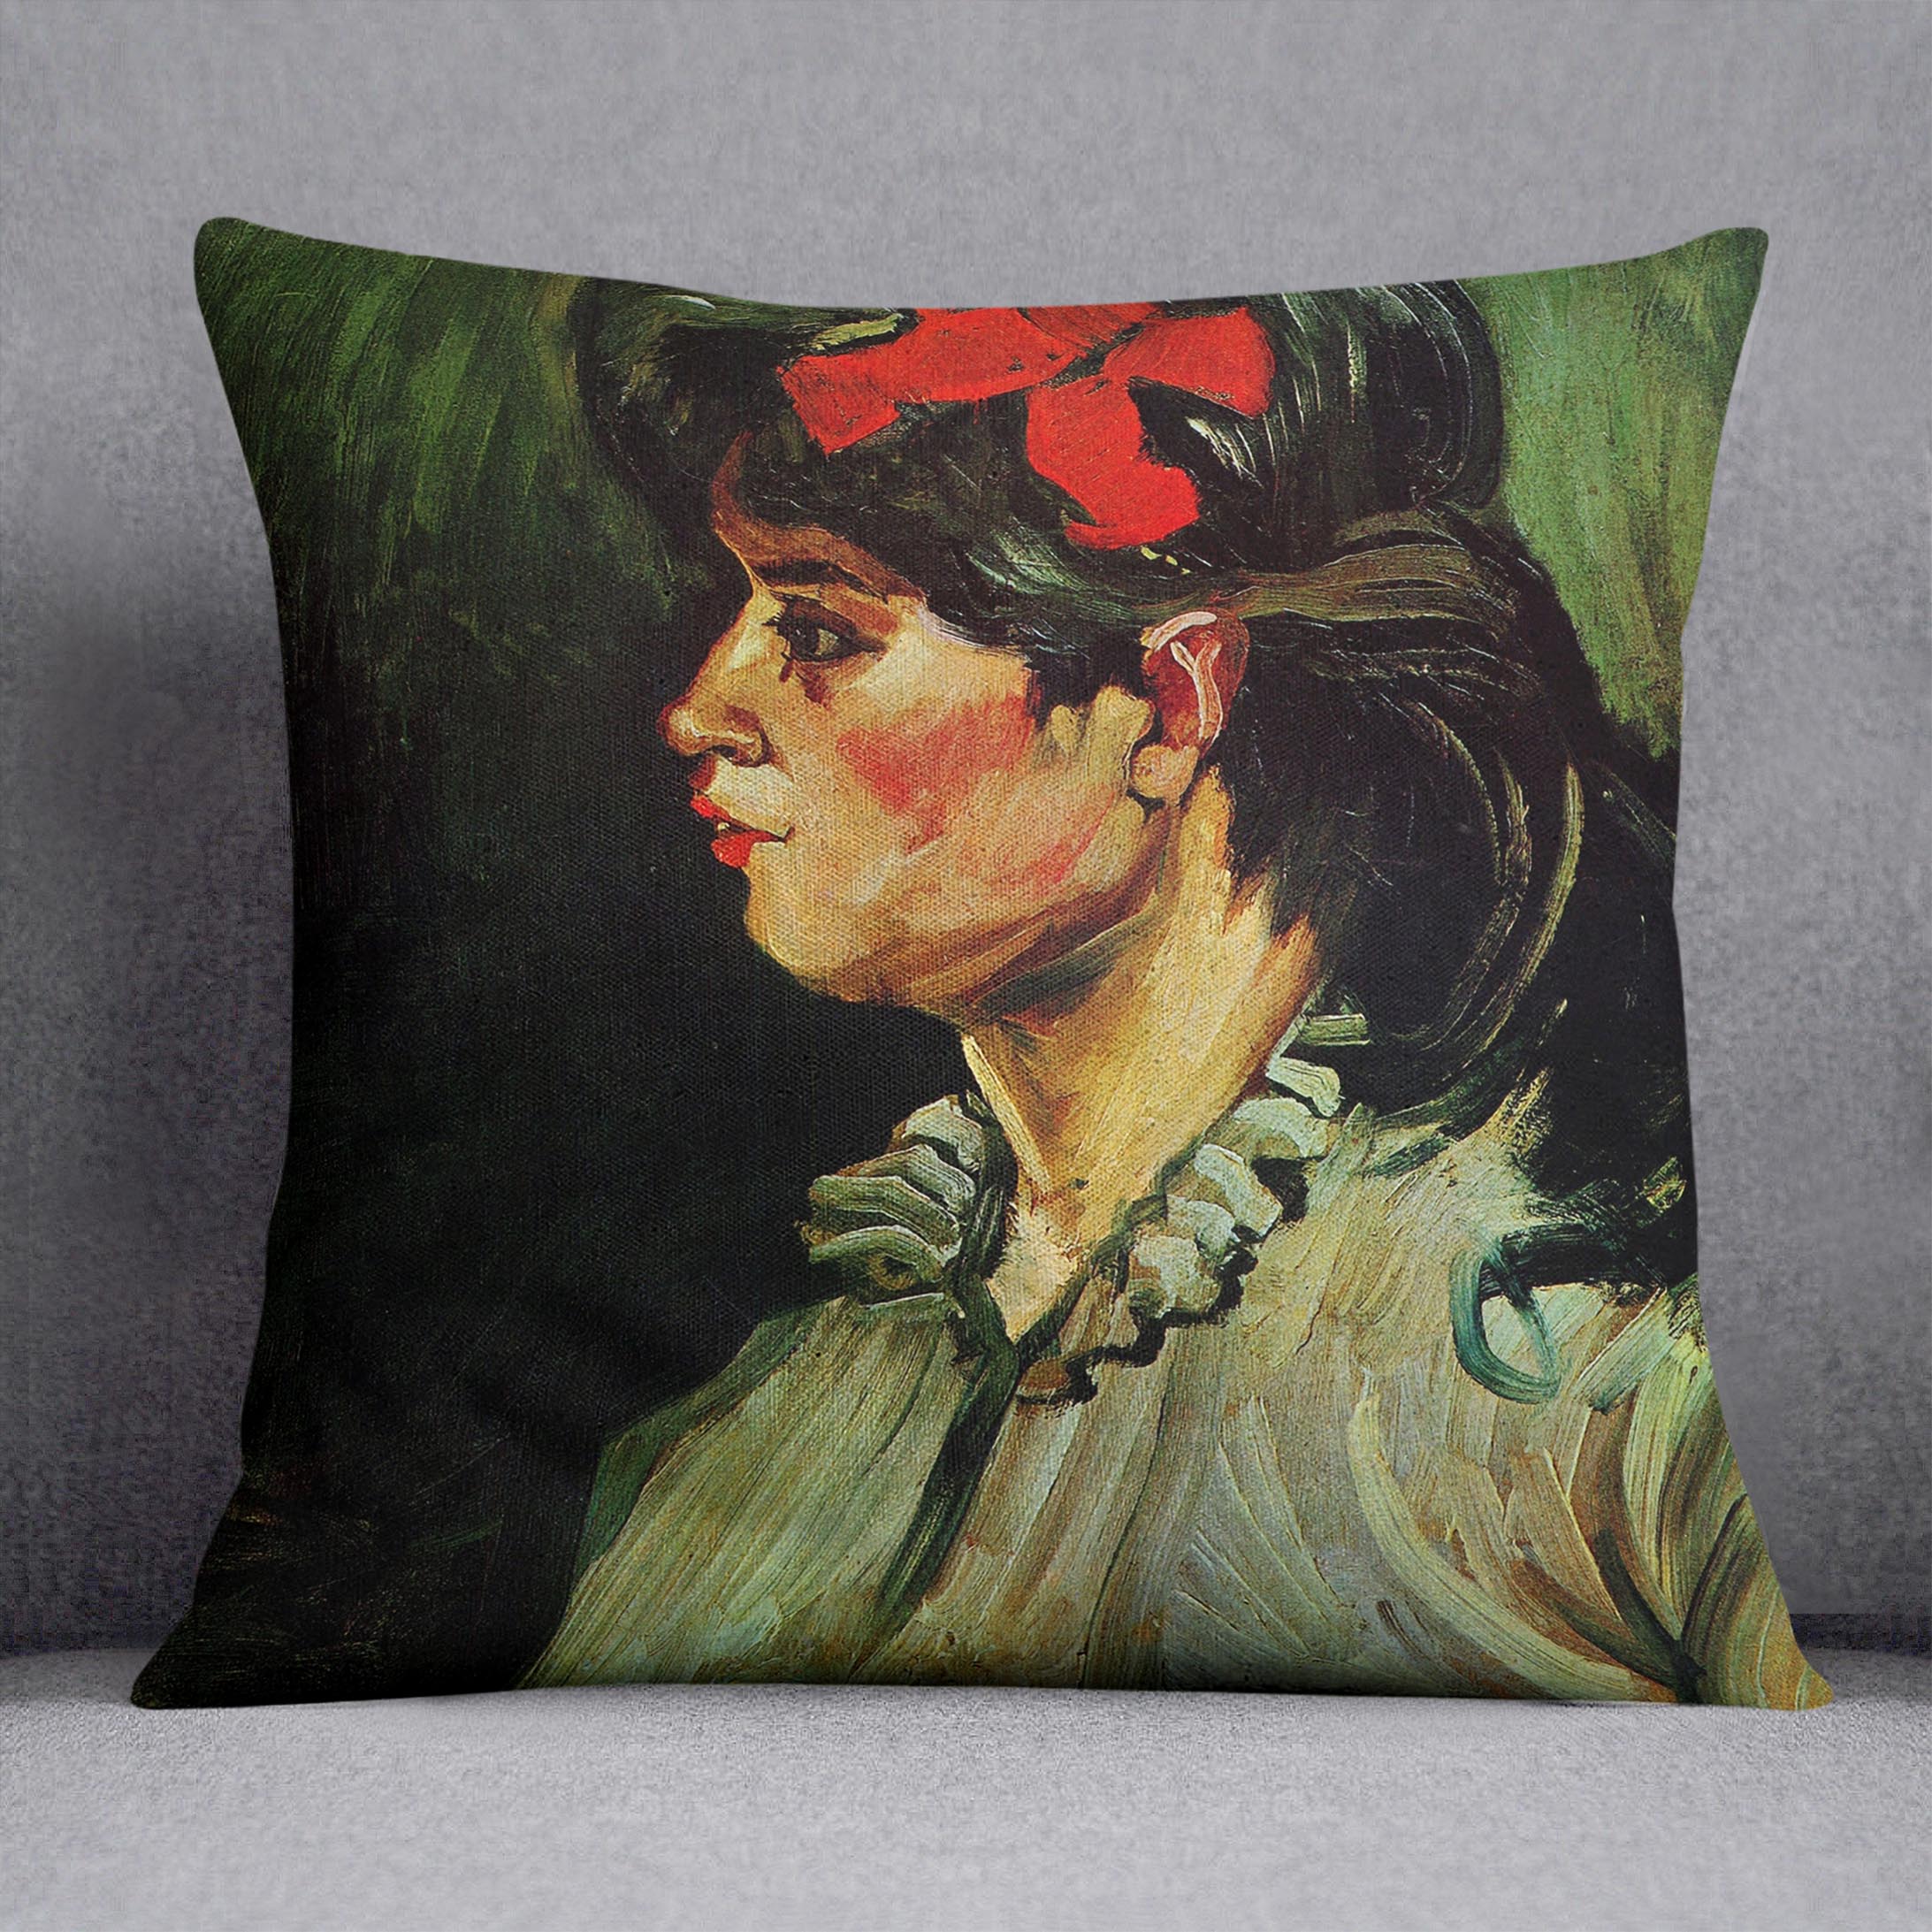 Portrait of a Woman with Red Ribbon by Van Gogh Cushion